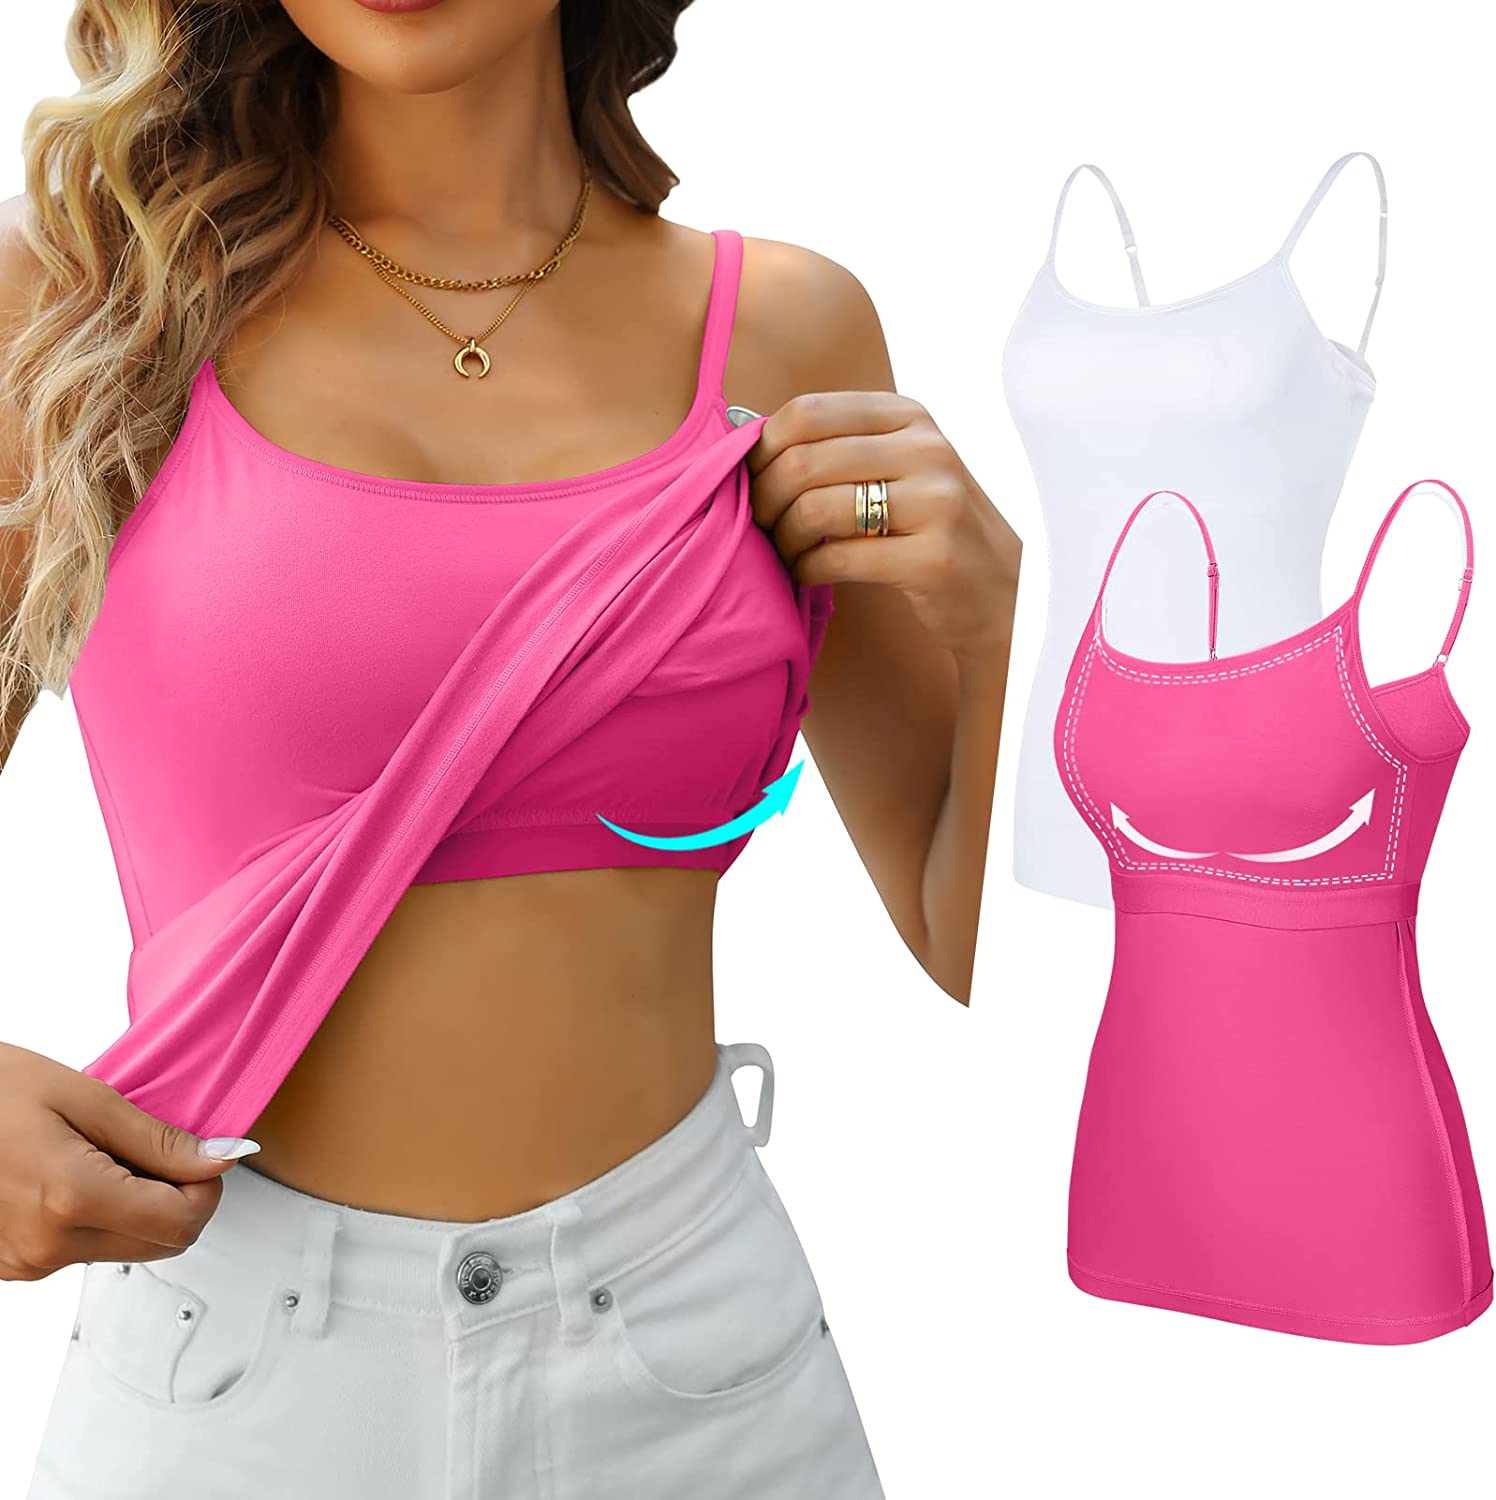 Buy Tank Tops with Built in Bra for Women Adjustable Spaghetti